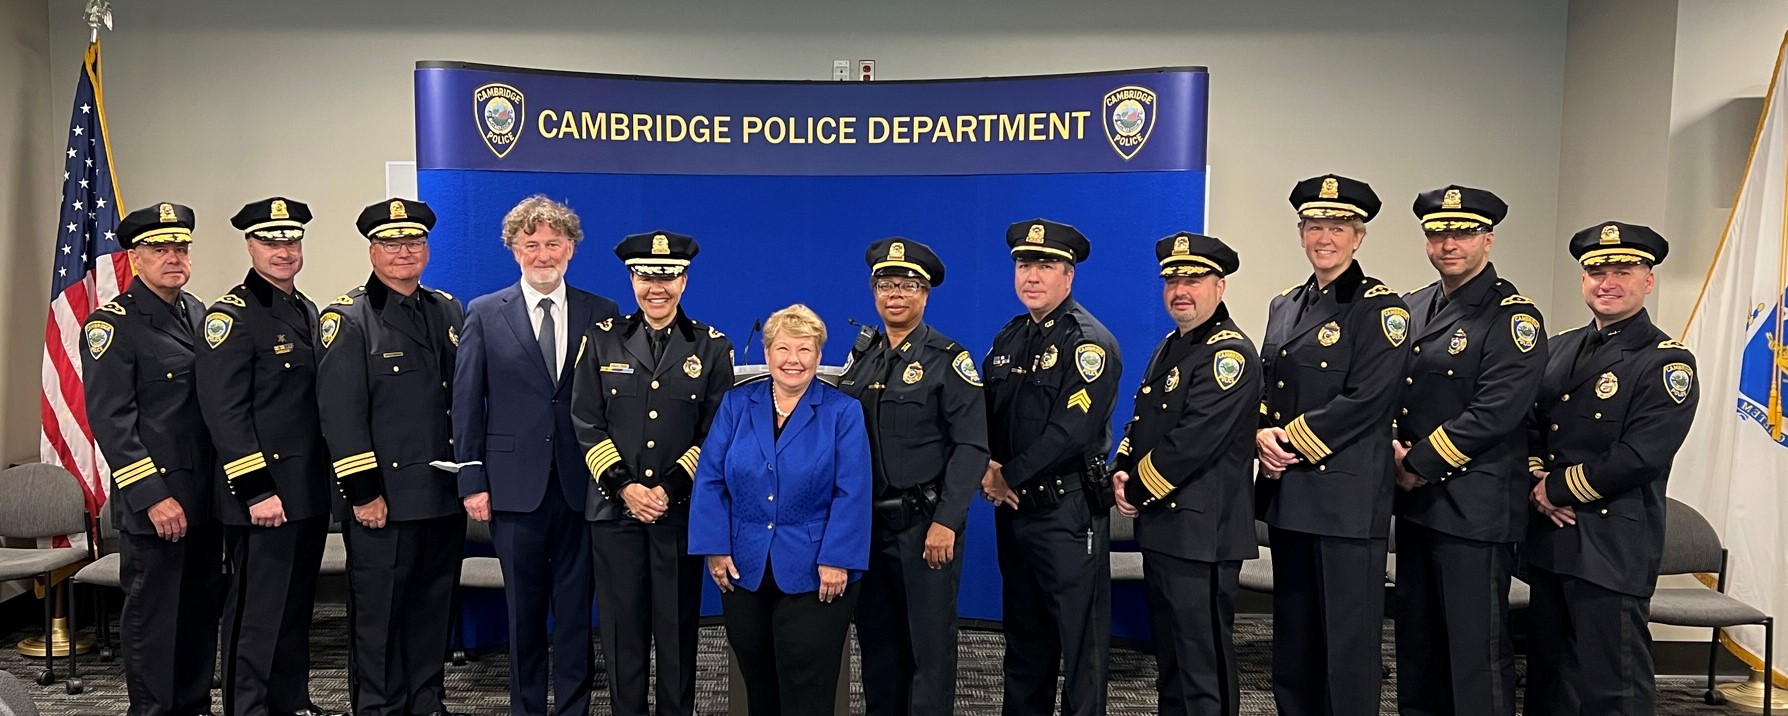 Cambridge Police Department Introduces New Recruiting Marketing Campaign